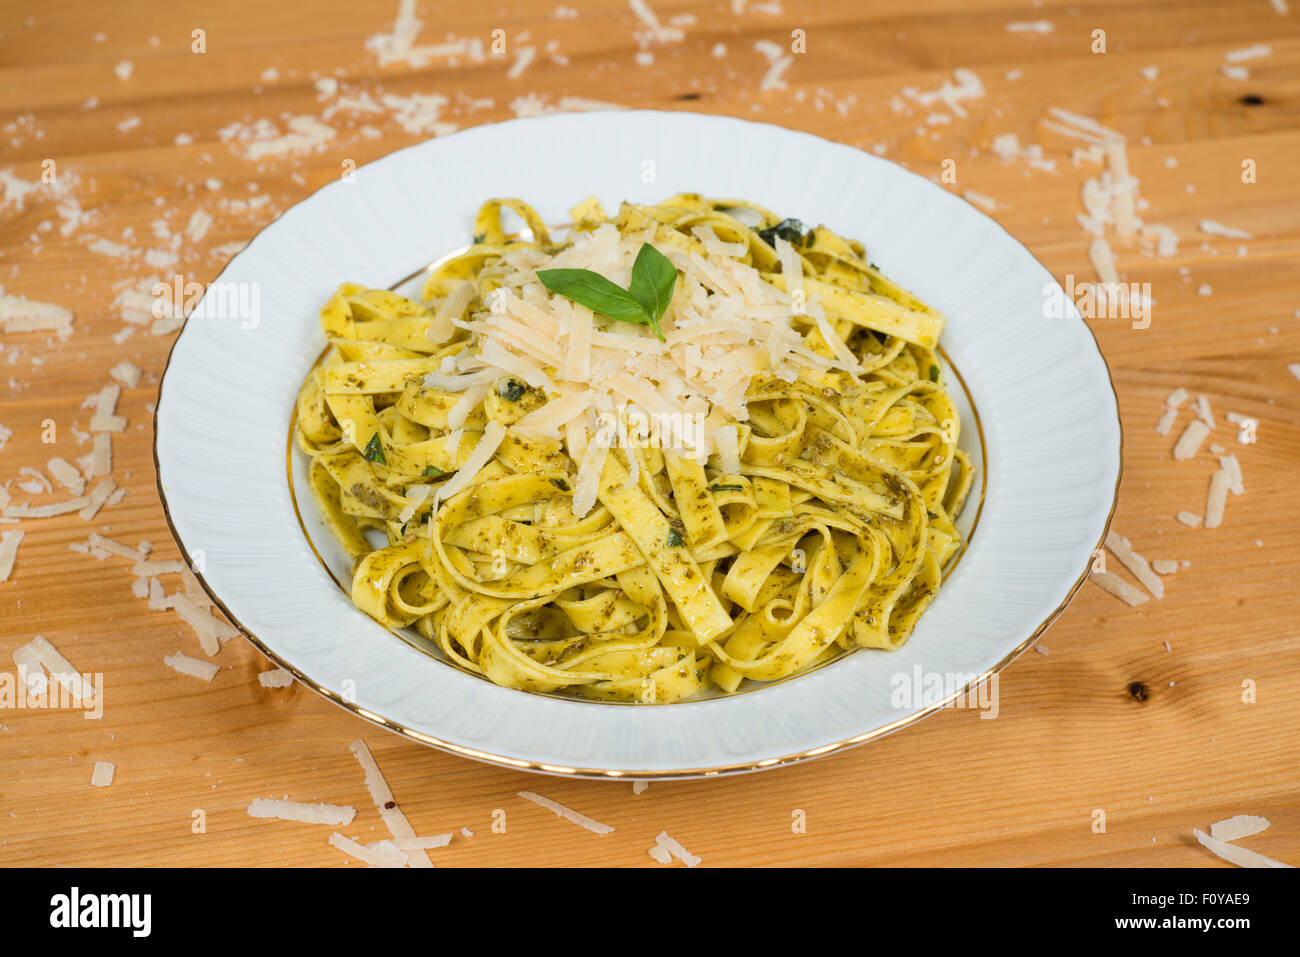 Tagliatelle pasta with pesto sauce and basil leafs on white plate, wood background Stock Photo